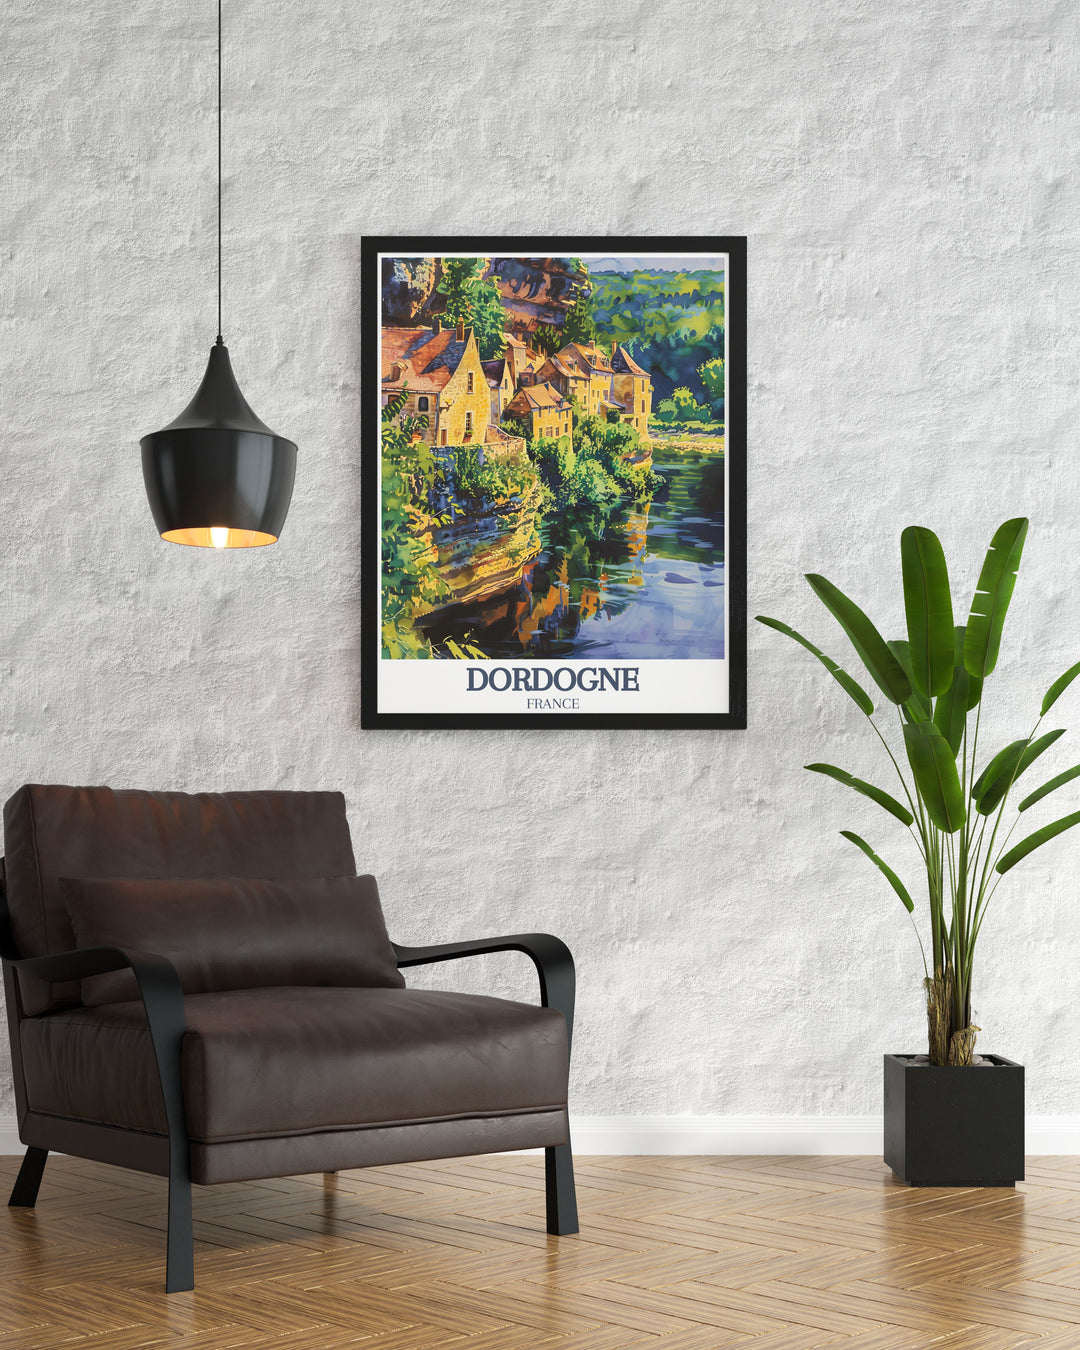 Detailed Dordogne River and La Roque Gageac poster highlighting the natural beauty and rustic charm of this picturesque village ideal for France wall hanging